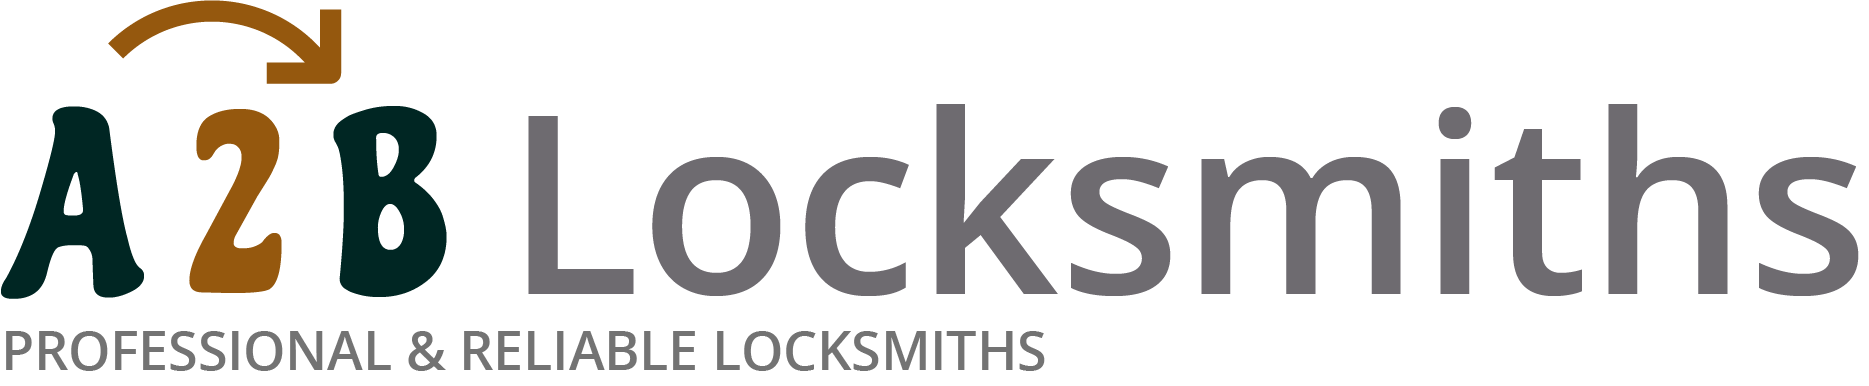 If you are locked out of house in Harlow, our 24/7 local emergency locksmith services can help you.